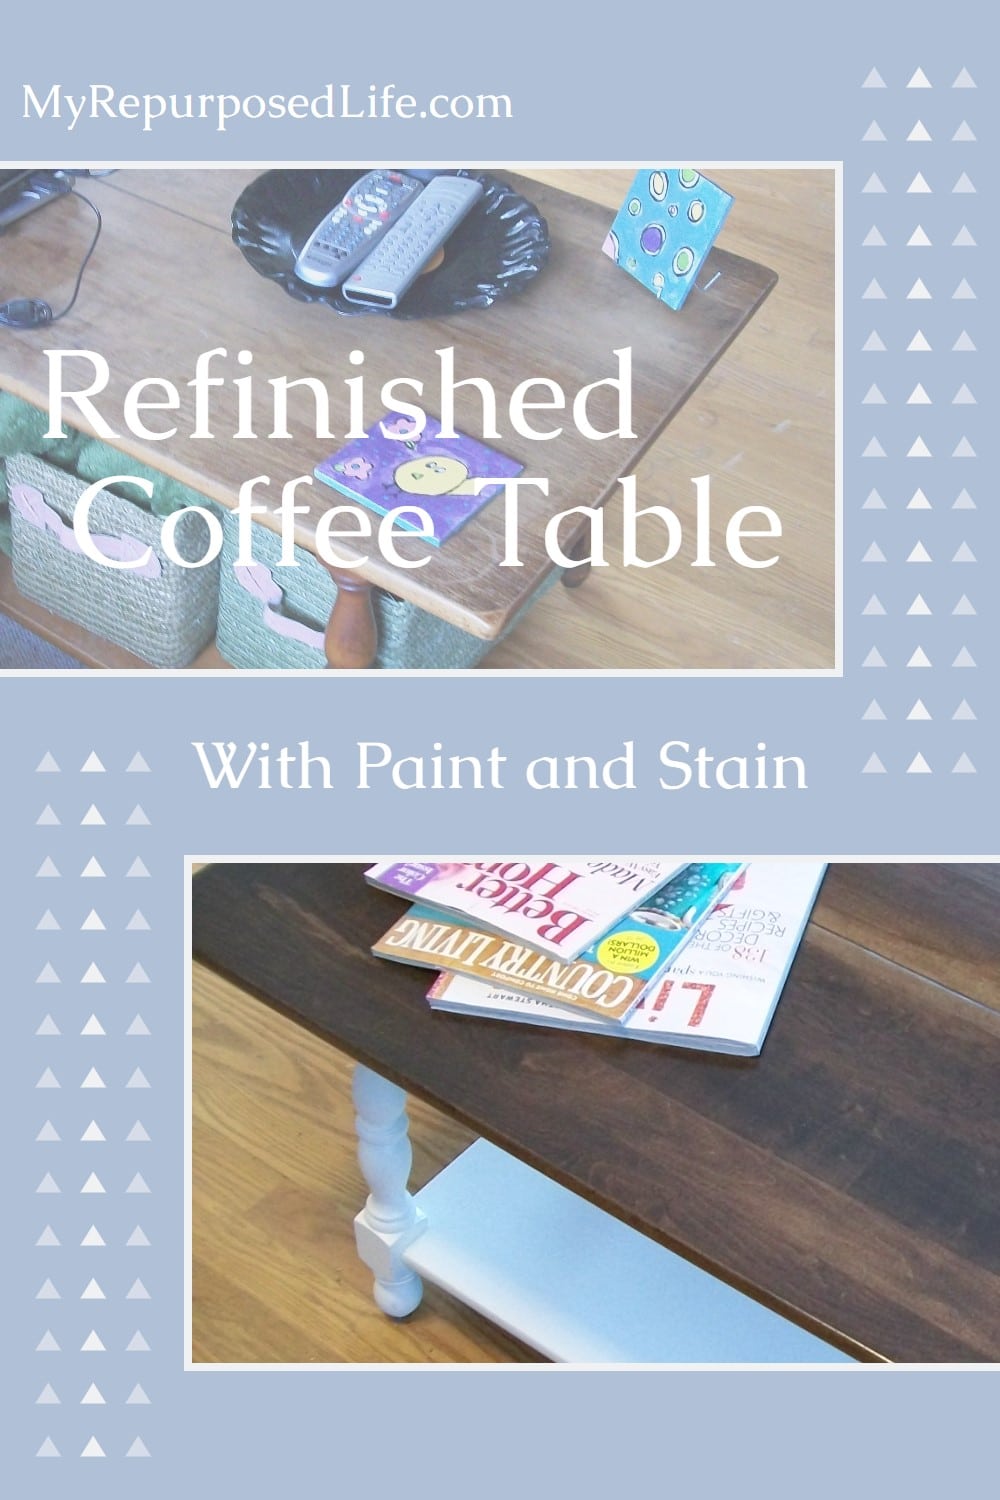 Whether it's your furniture or you bought it, are you looking to refinish a coffee table? Step by step directions for a paint and stain combination. #MyRepurposedLife #refinishfurniture via @repurposedlife